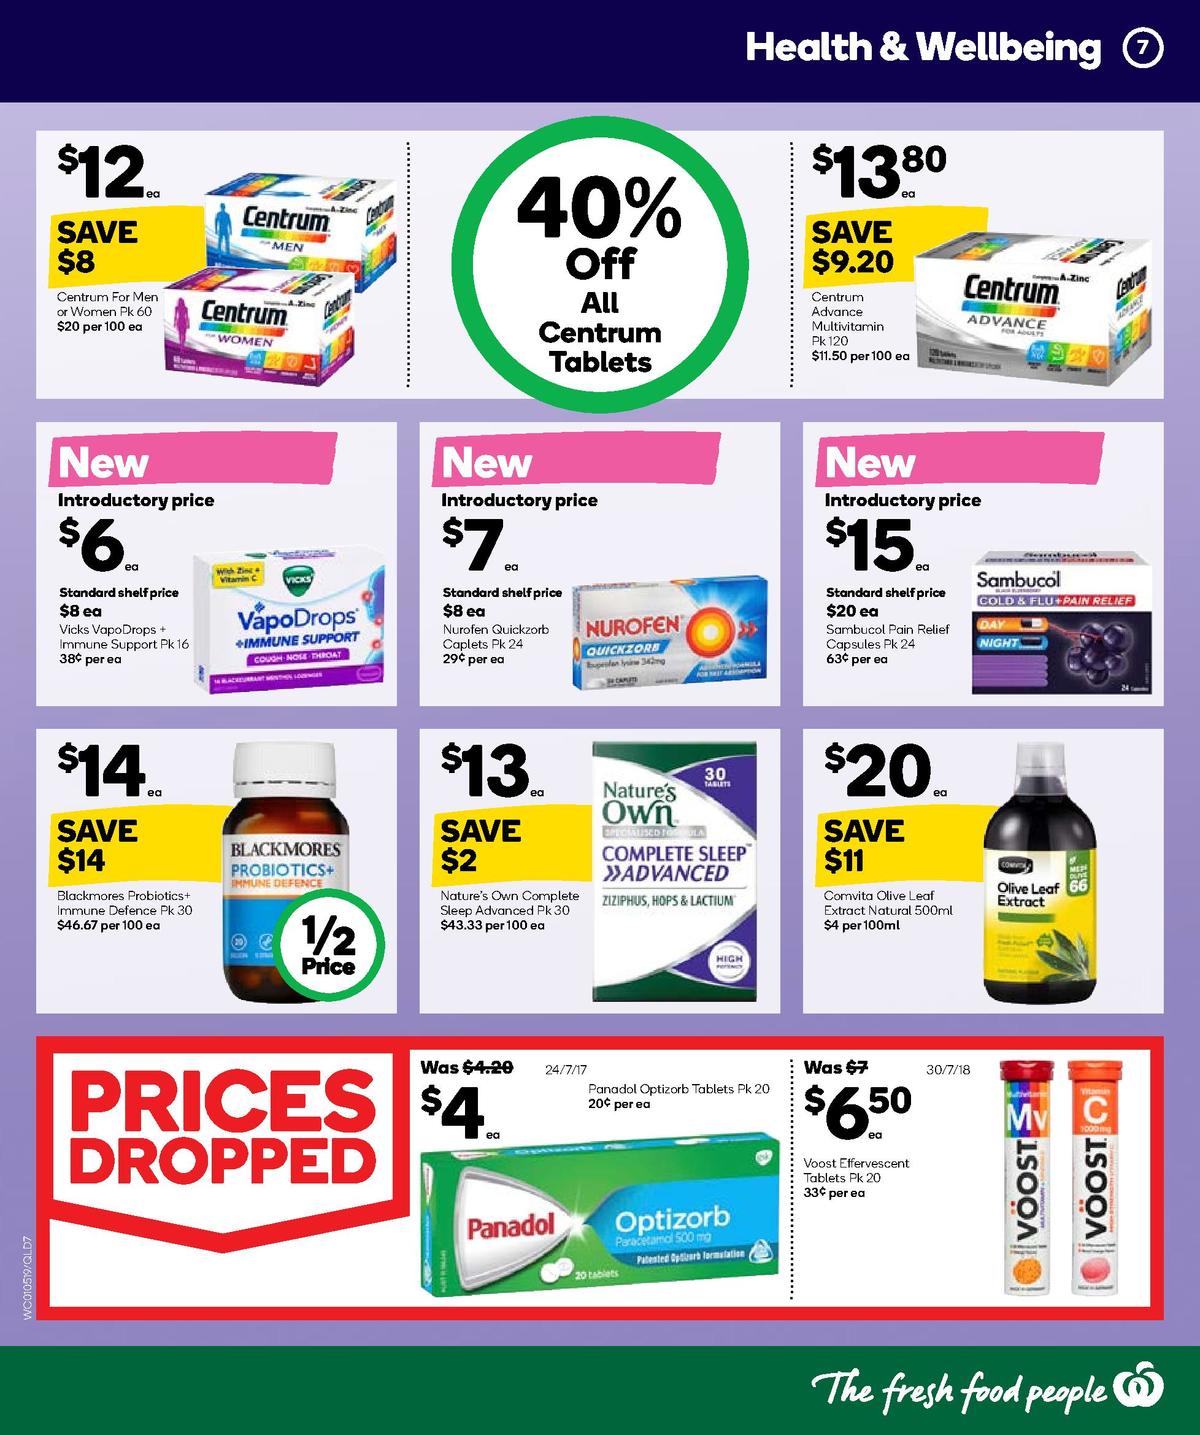 Woolworths Health & Beauty Catalogues from 1 May